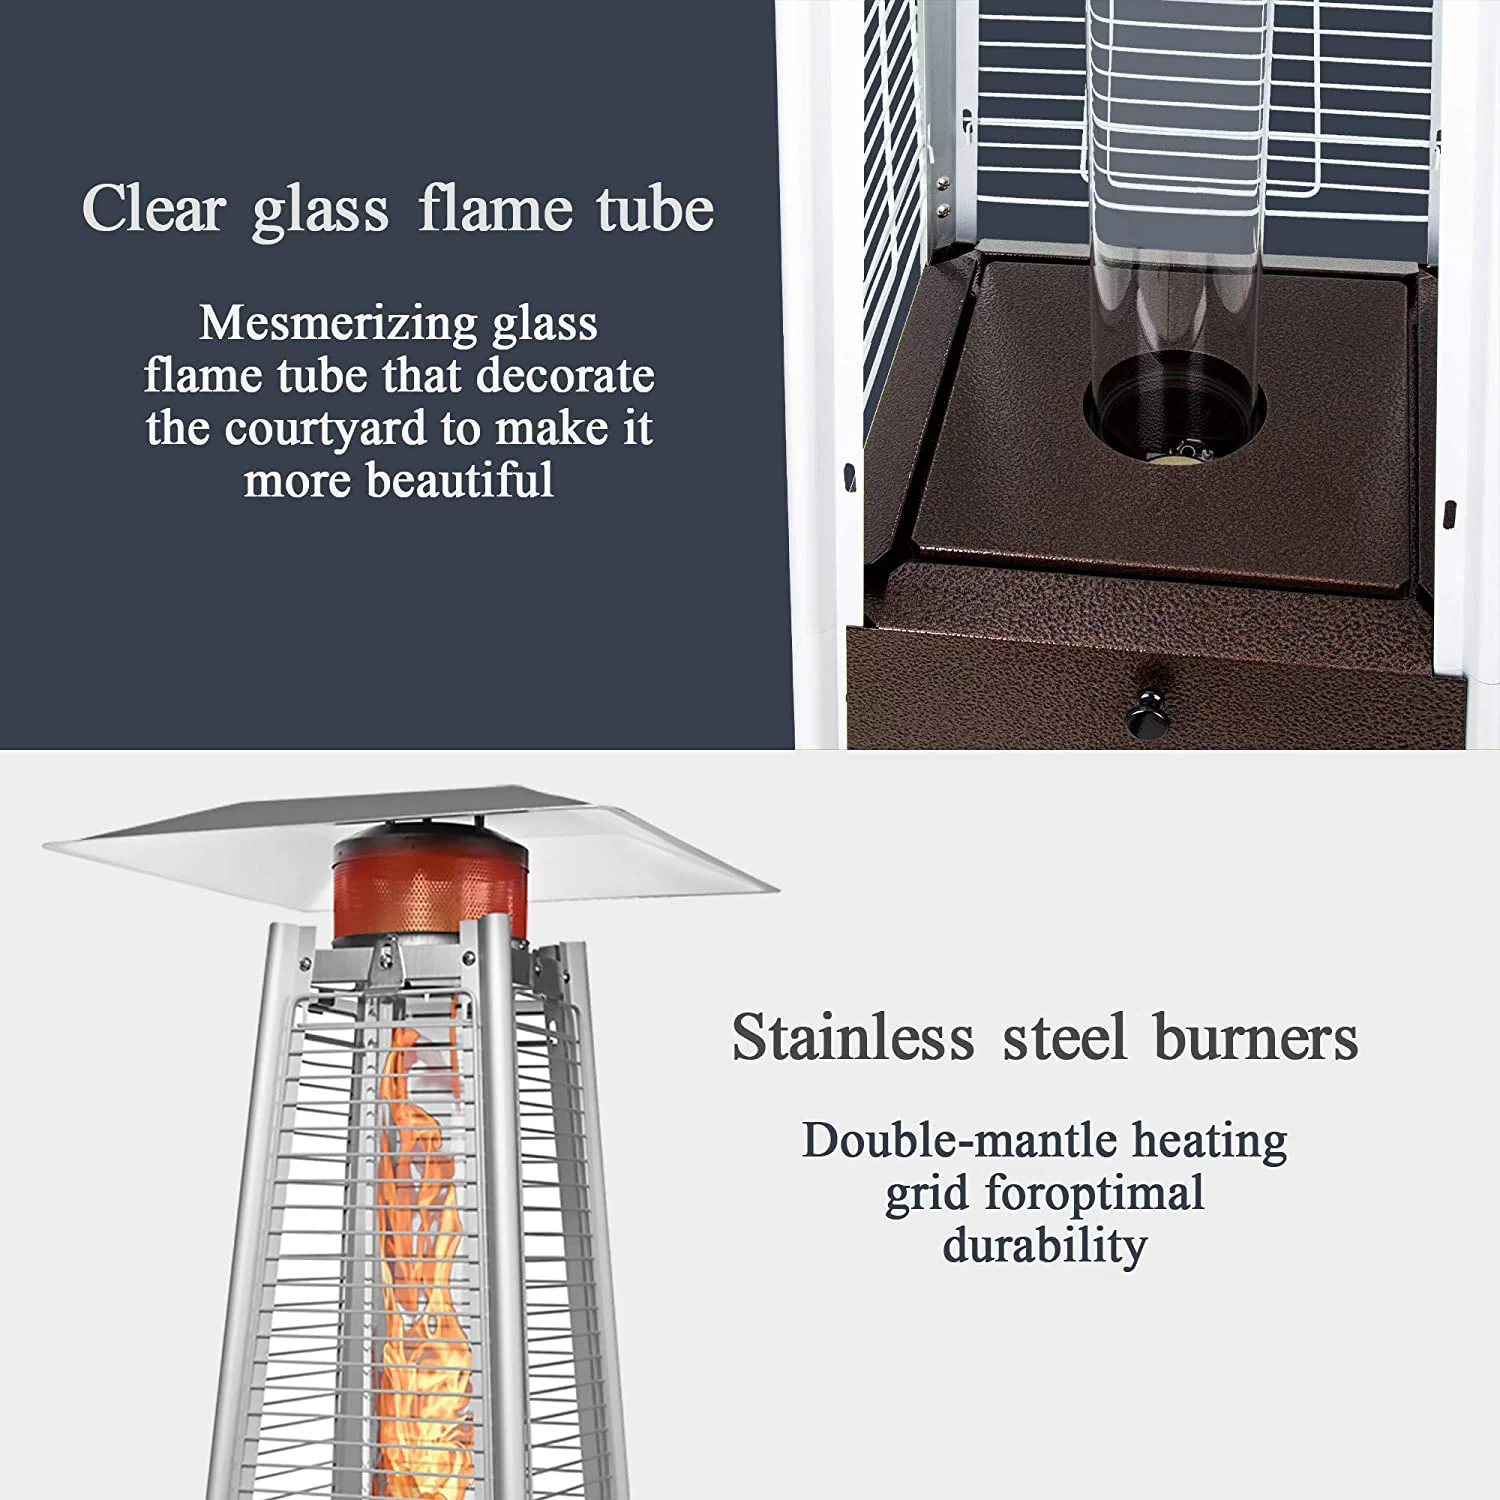 PAMAPIC Patio heater 42000 BTU Stainless Steel Pyramid Patio heater with CoverOutdoor Propane Heater on Wheels Easily Move Glass Tube Patio Heater great for backyards restaurant cafeteria etc 5